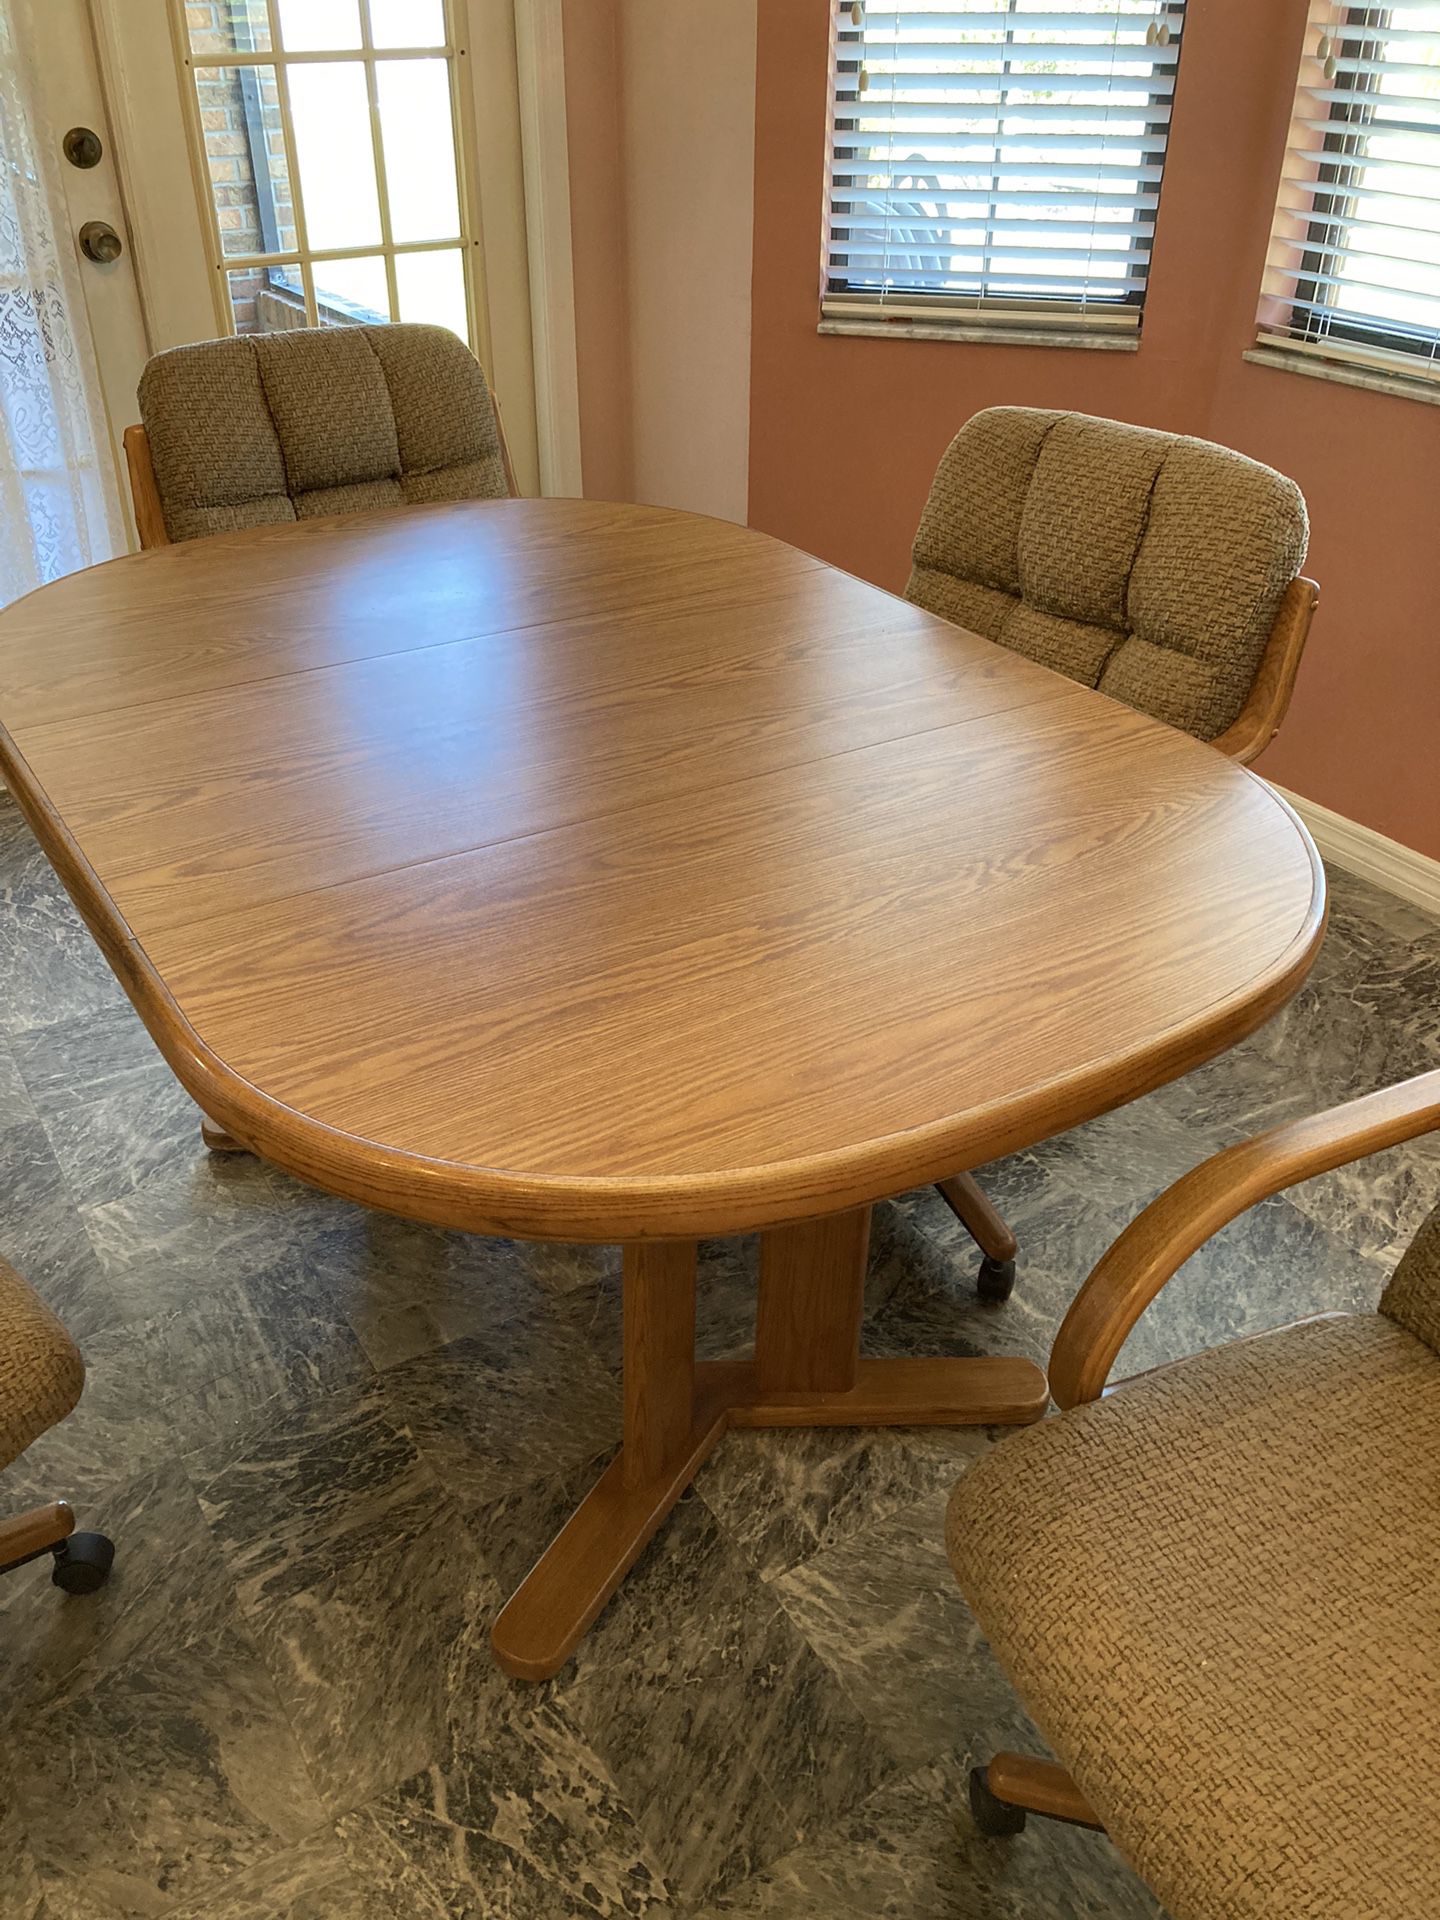 FREE!!!Dining Room Table With 4 Chairs